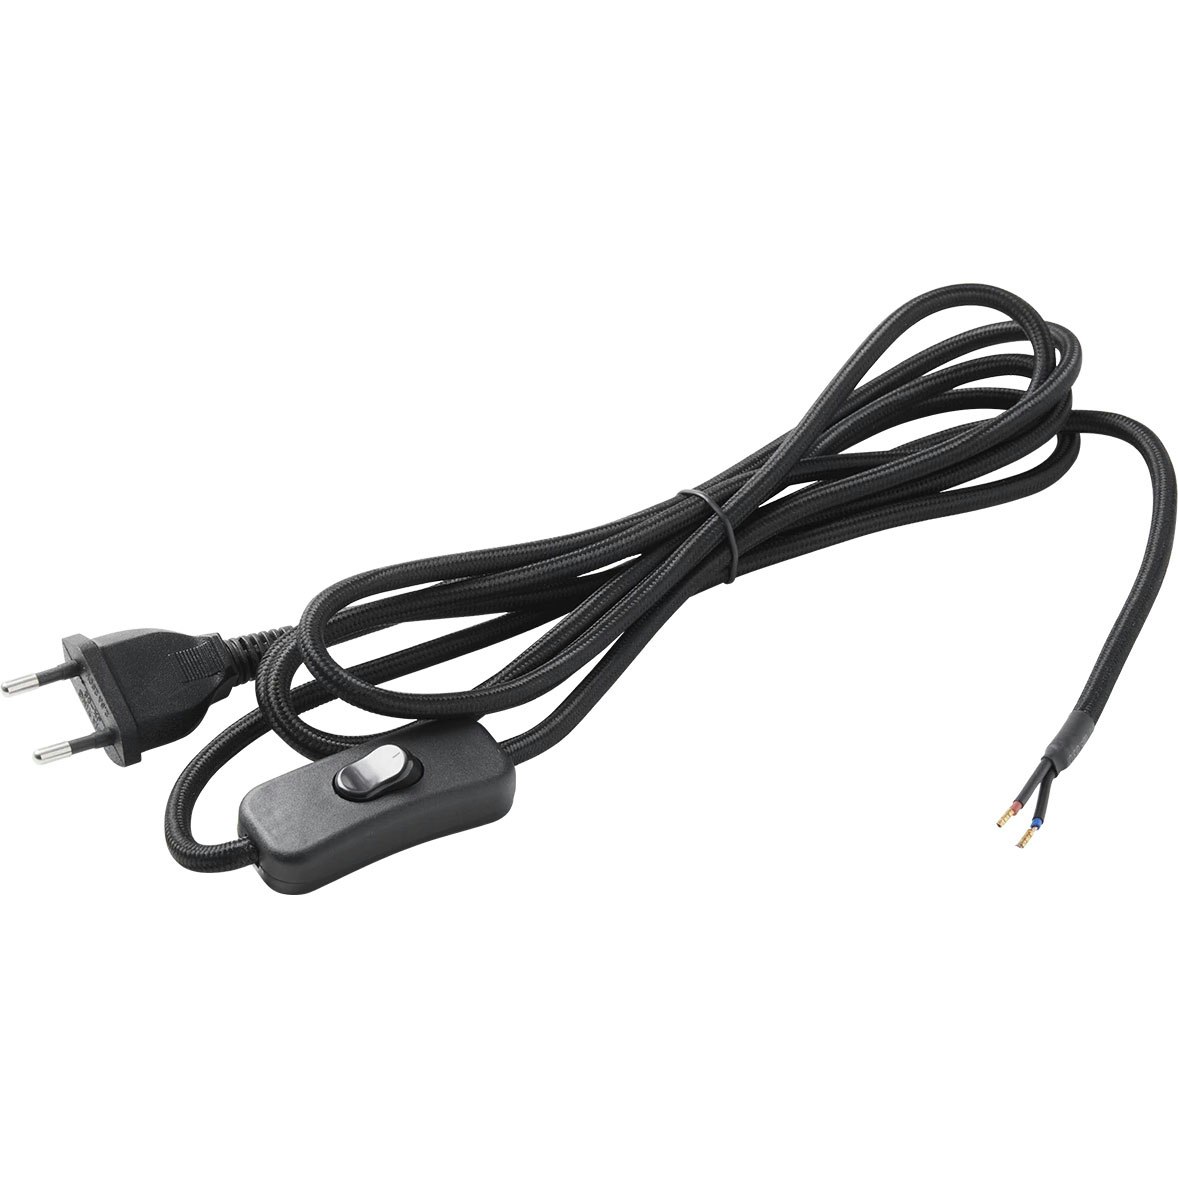 Cable Set With On And Off Switch, Black